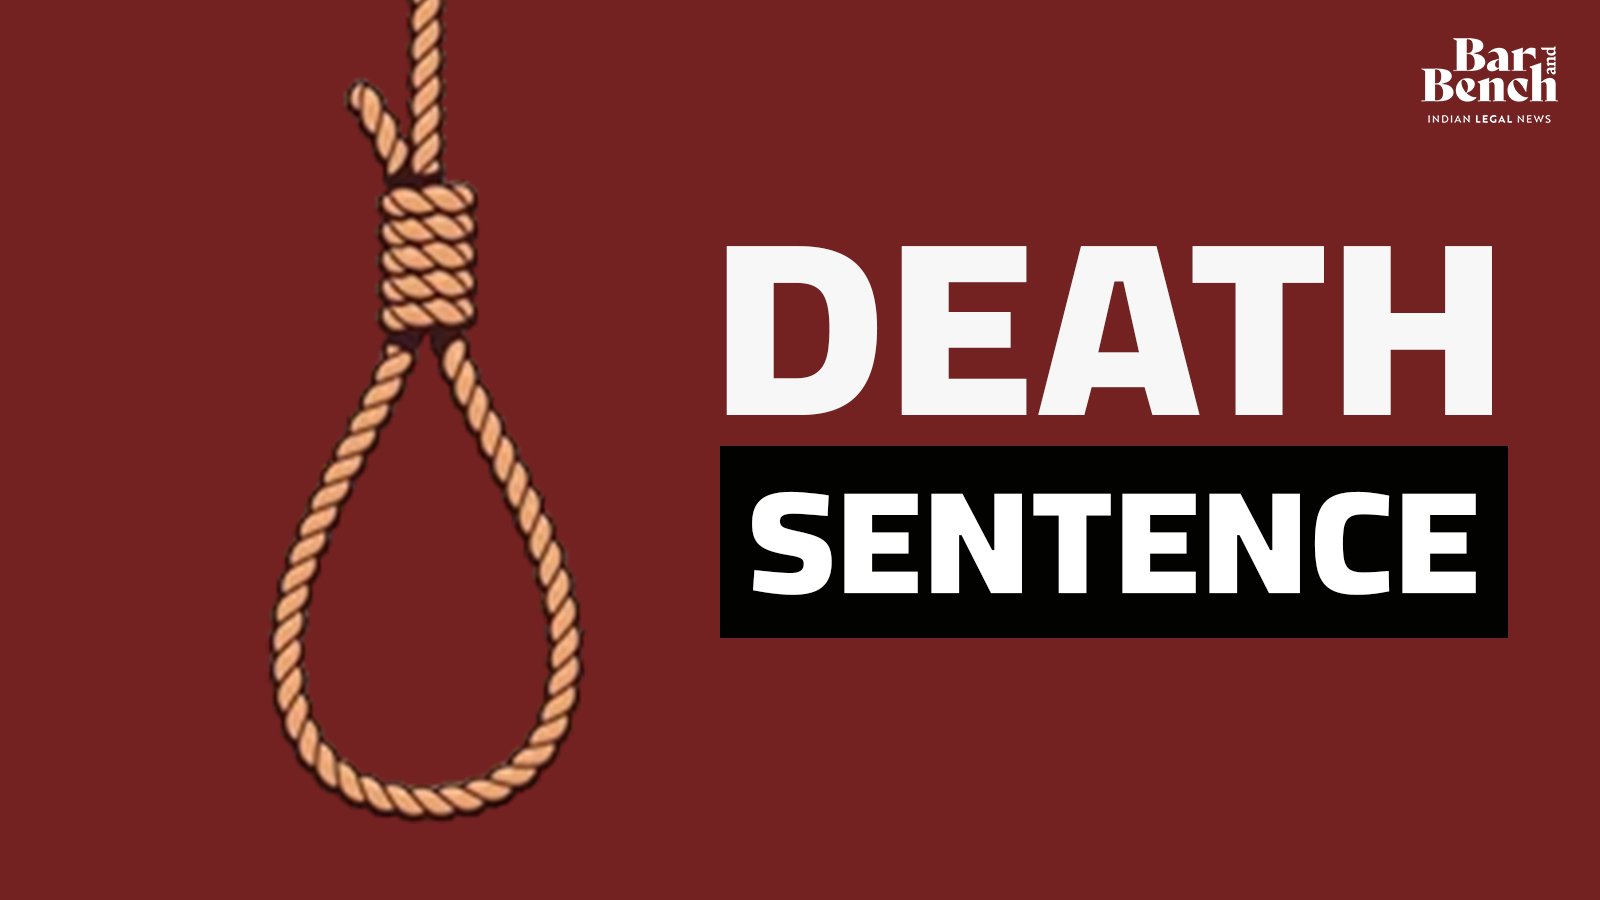 Current Affairs Question and Answers: Kerala High Court Confirms Death Sentence with “Heavy Heart”